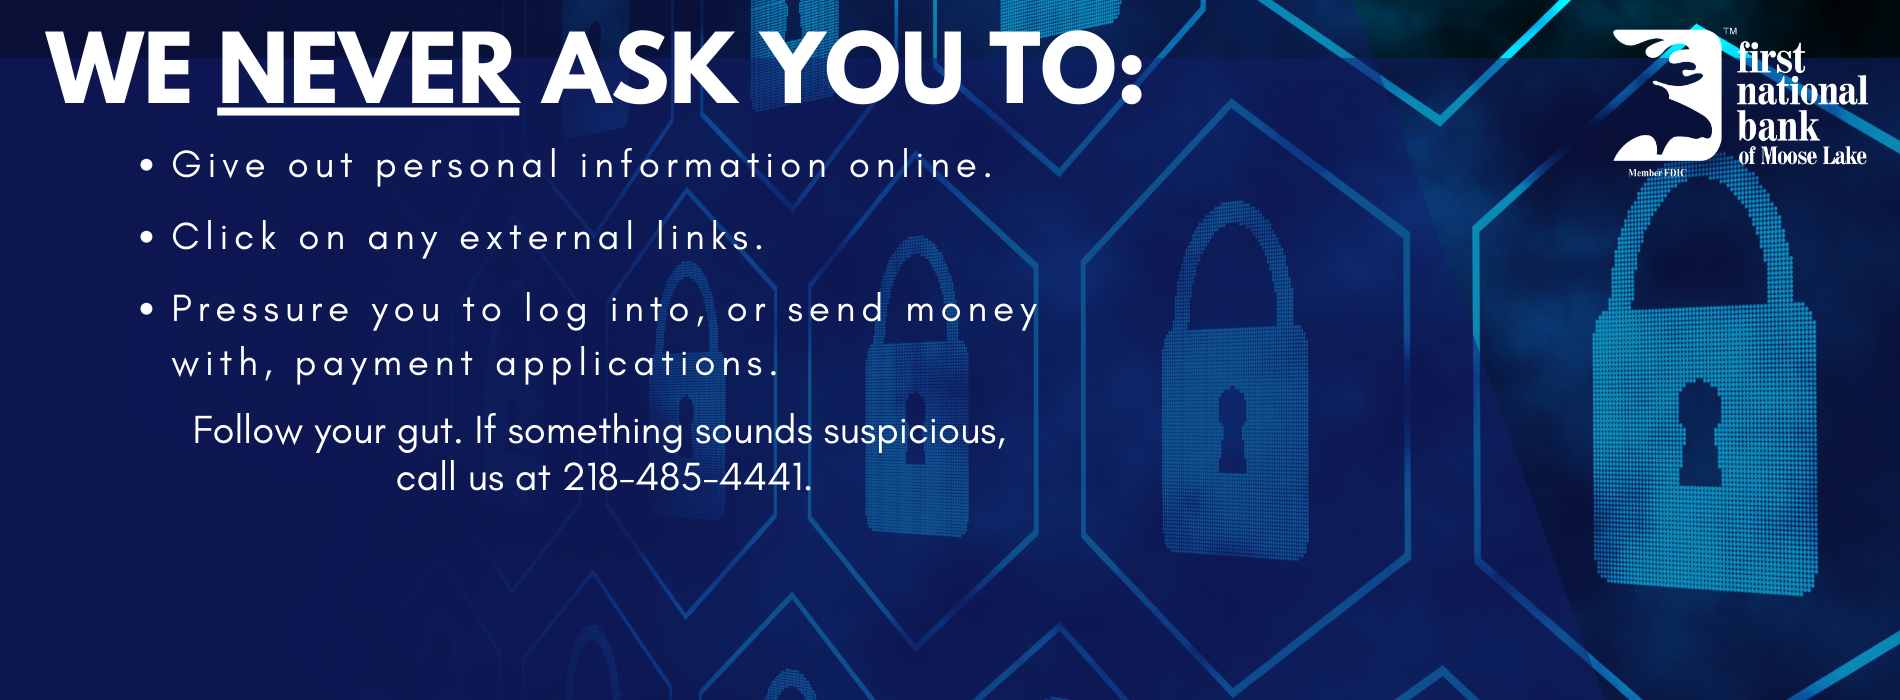 We never ask you to: Give out personal information online. Click on any external links. Pressure you to log into, or send money with, payment applications. Follow your gut. If something sounds suspicious, call us at 218-485-4441.